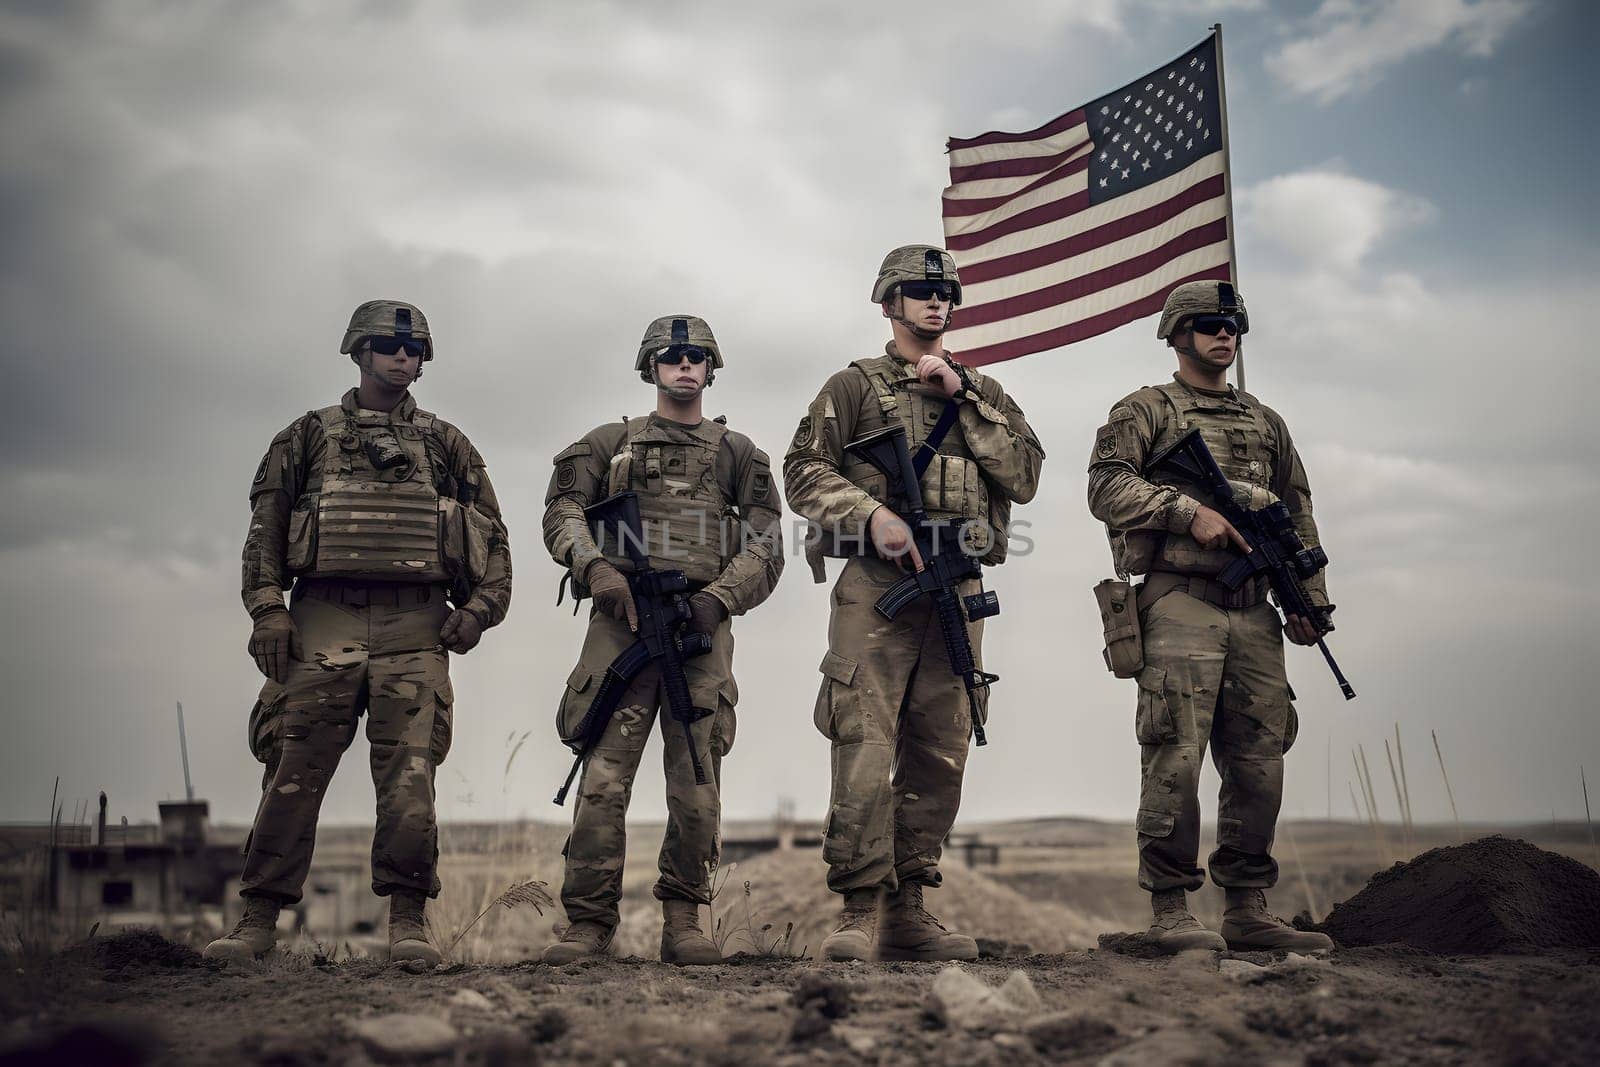 american soldiers and United States flag, neural network generated photorealistic image by z1b